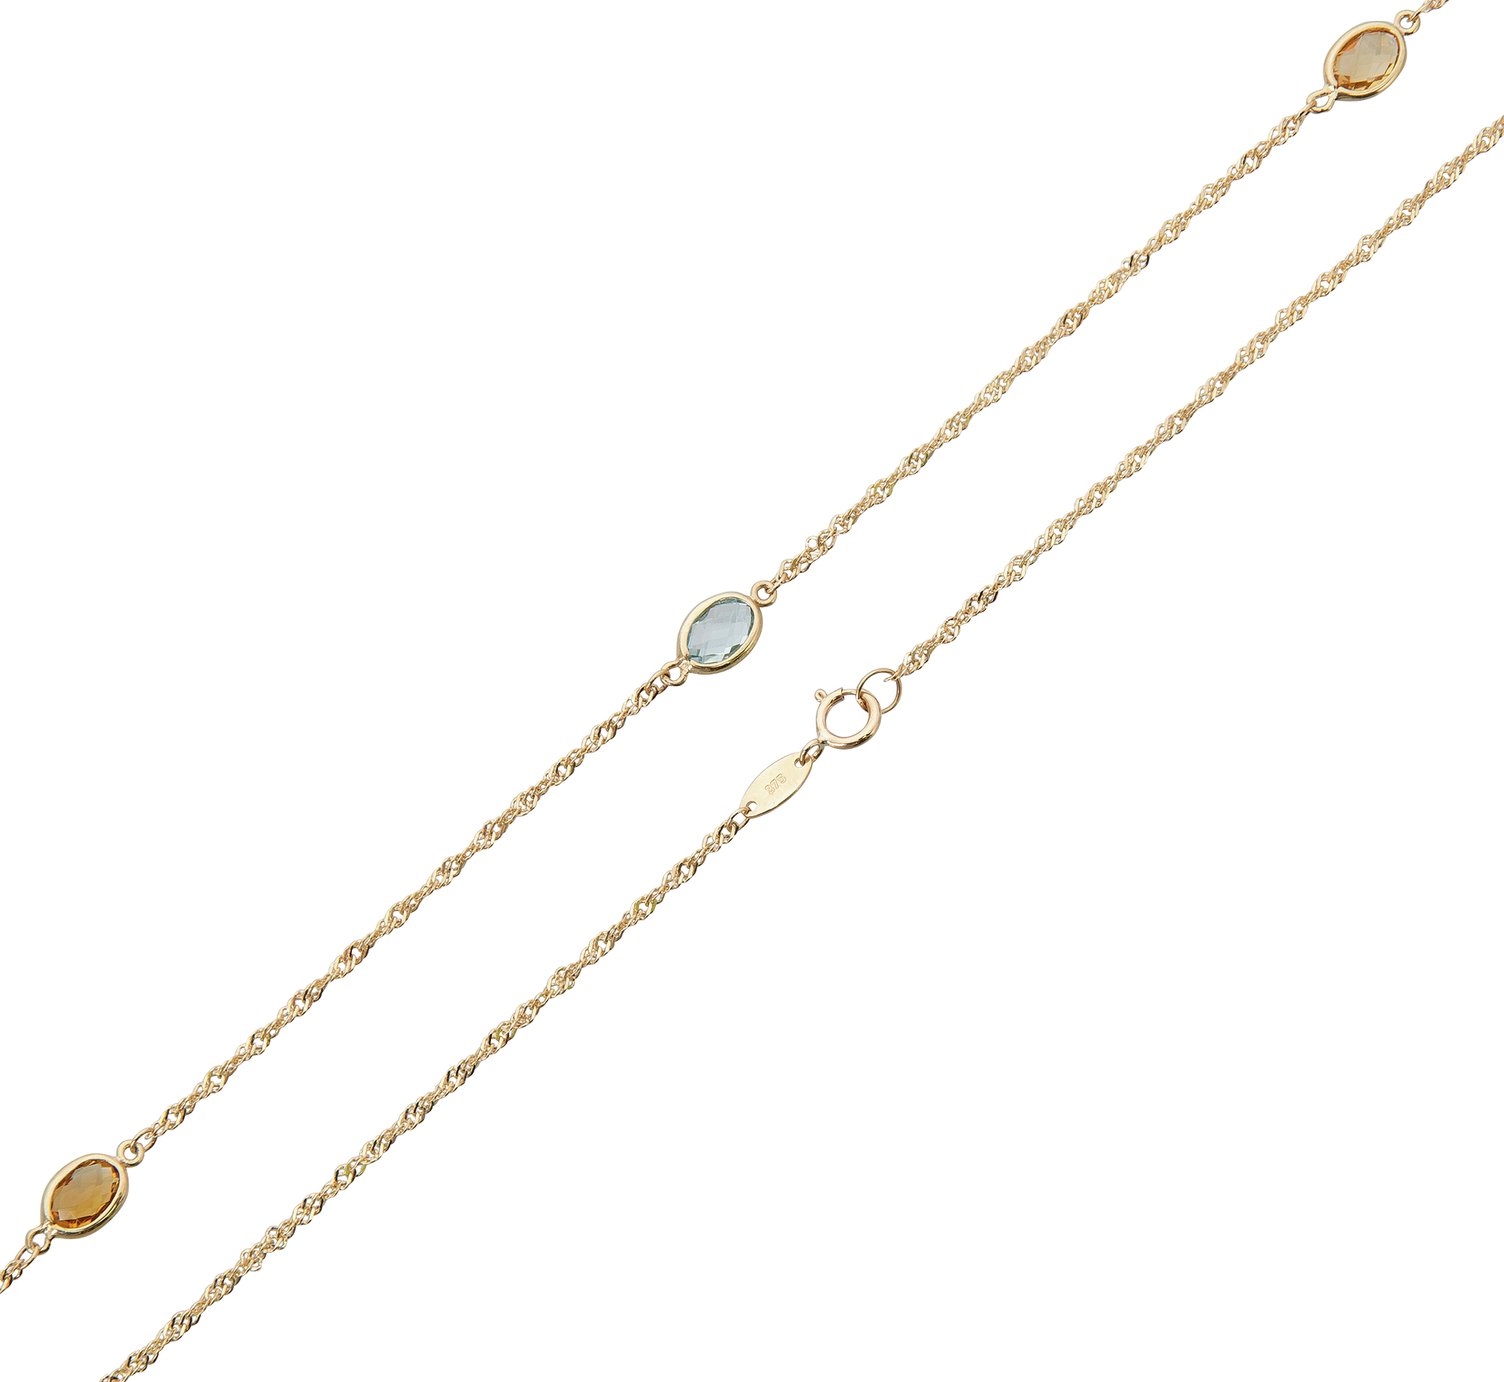 Revere 9ct Gold Multi Stone Necklace 17inch Necklace